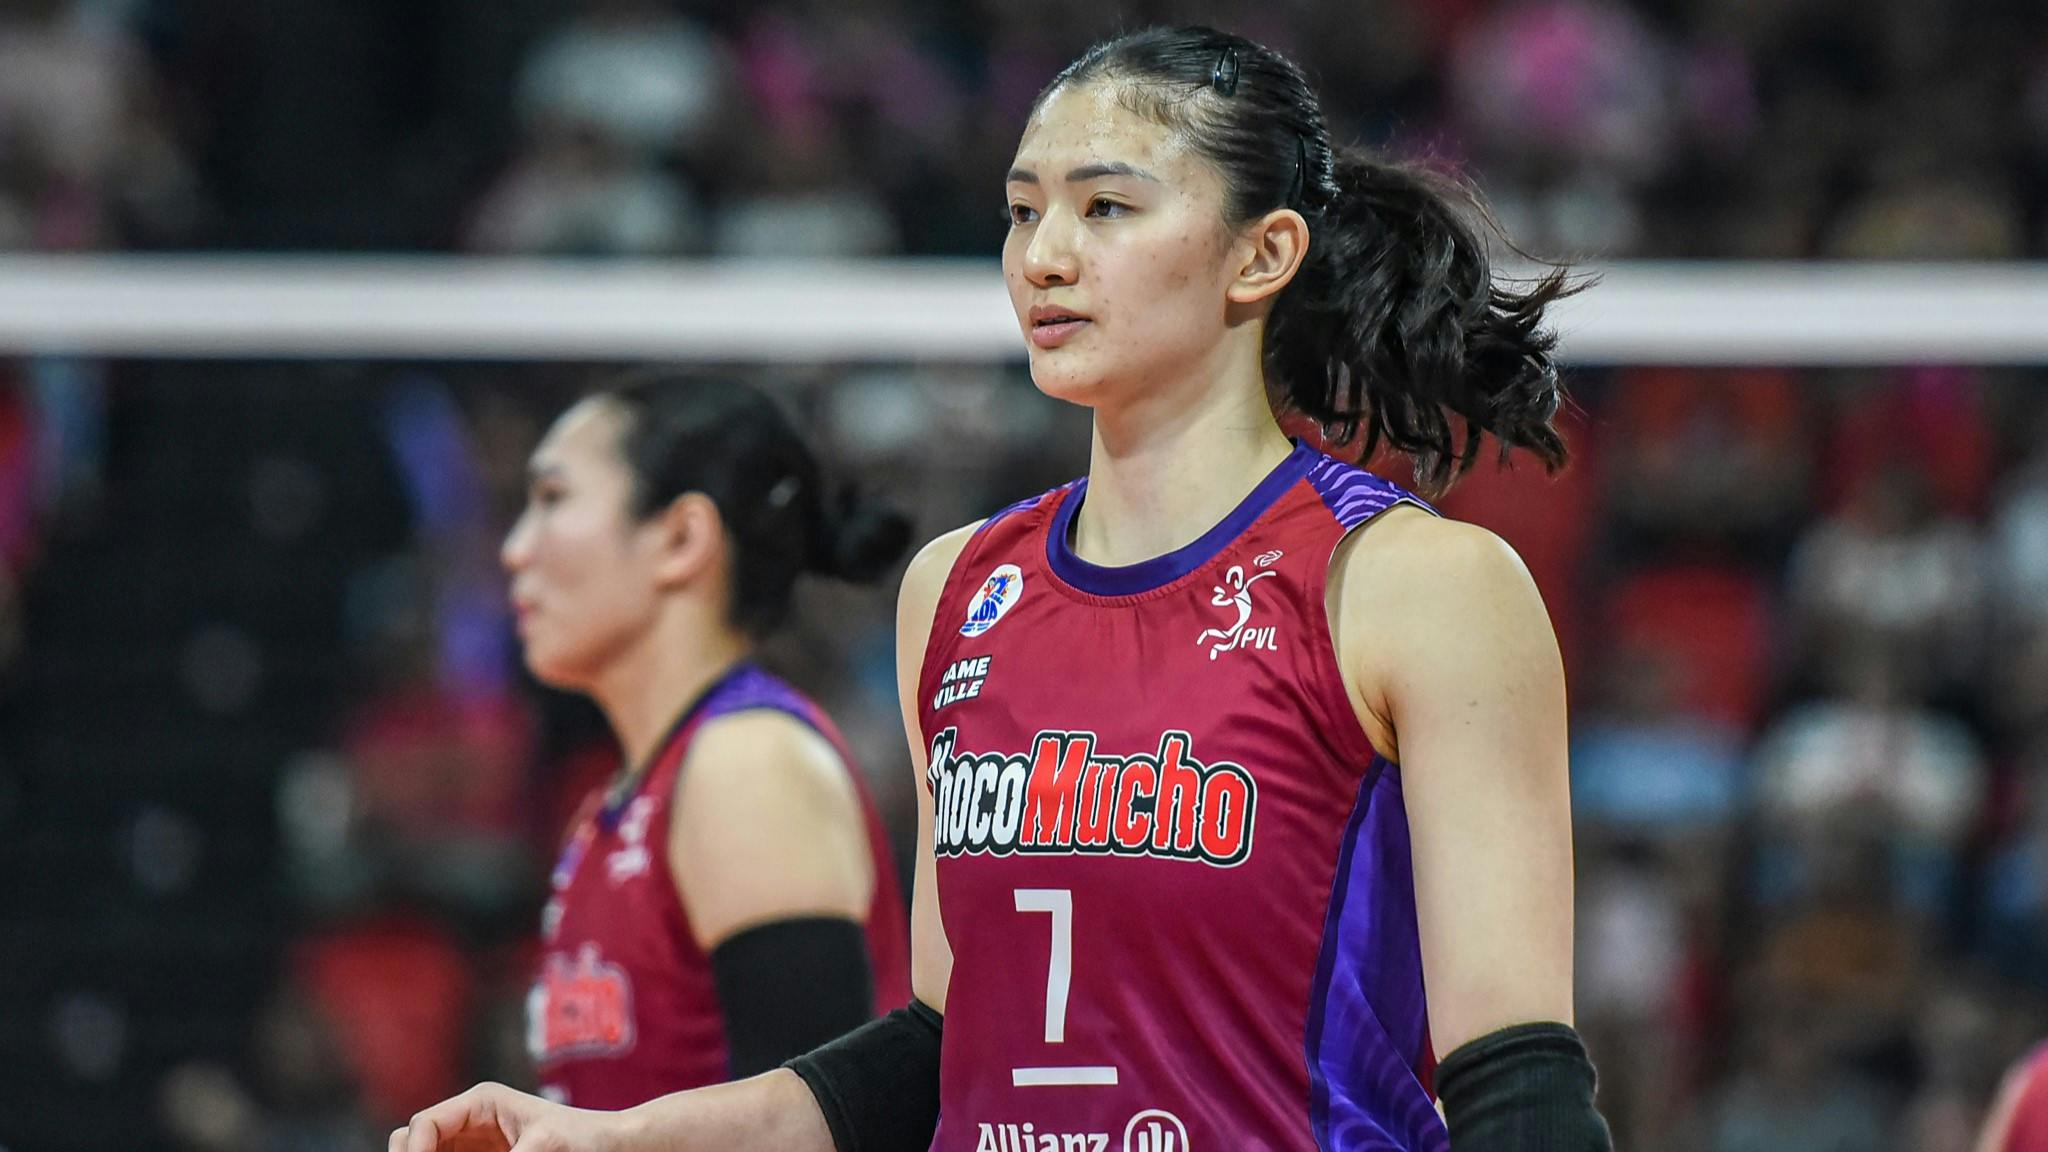 PVL: Hard work, patience pay off for Maddie Madayag as Choco Mucho ends losing skid to Creamline